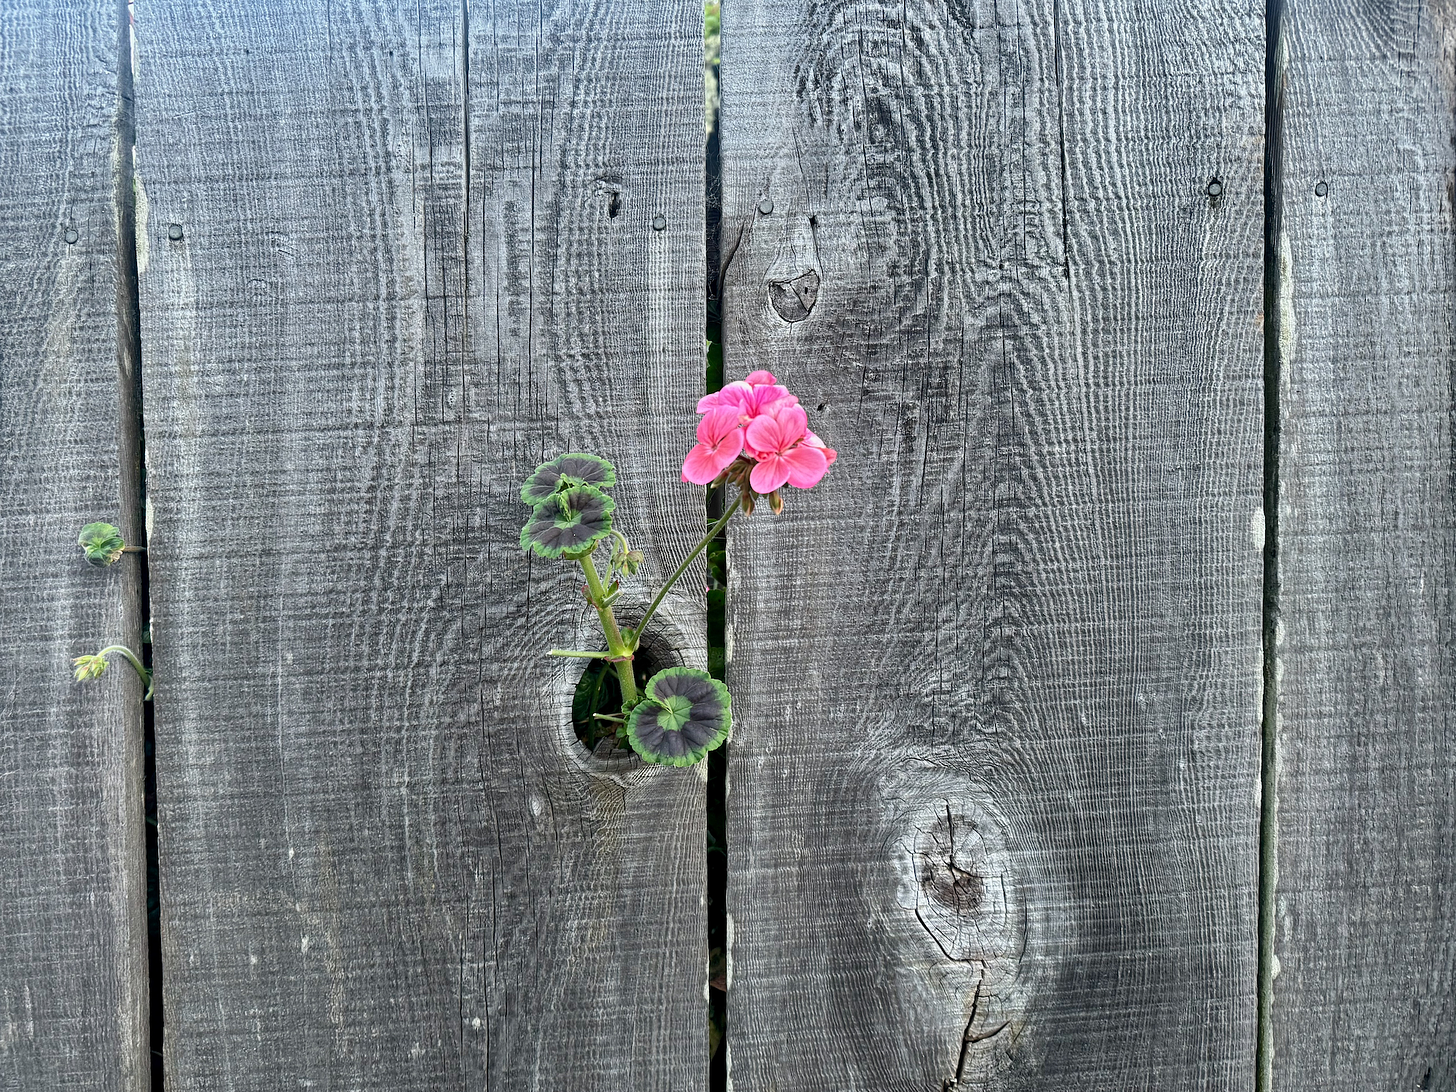 Pink geranium poking through a knothole in a fence